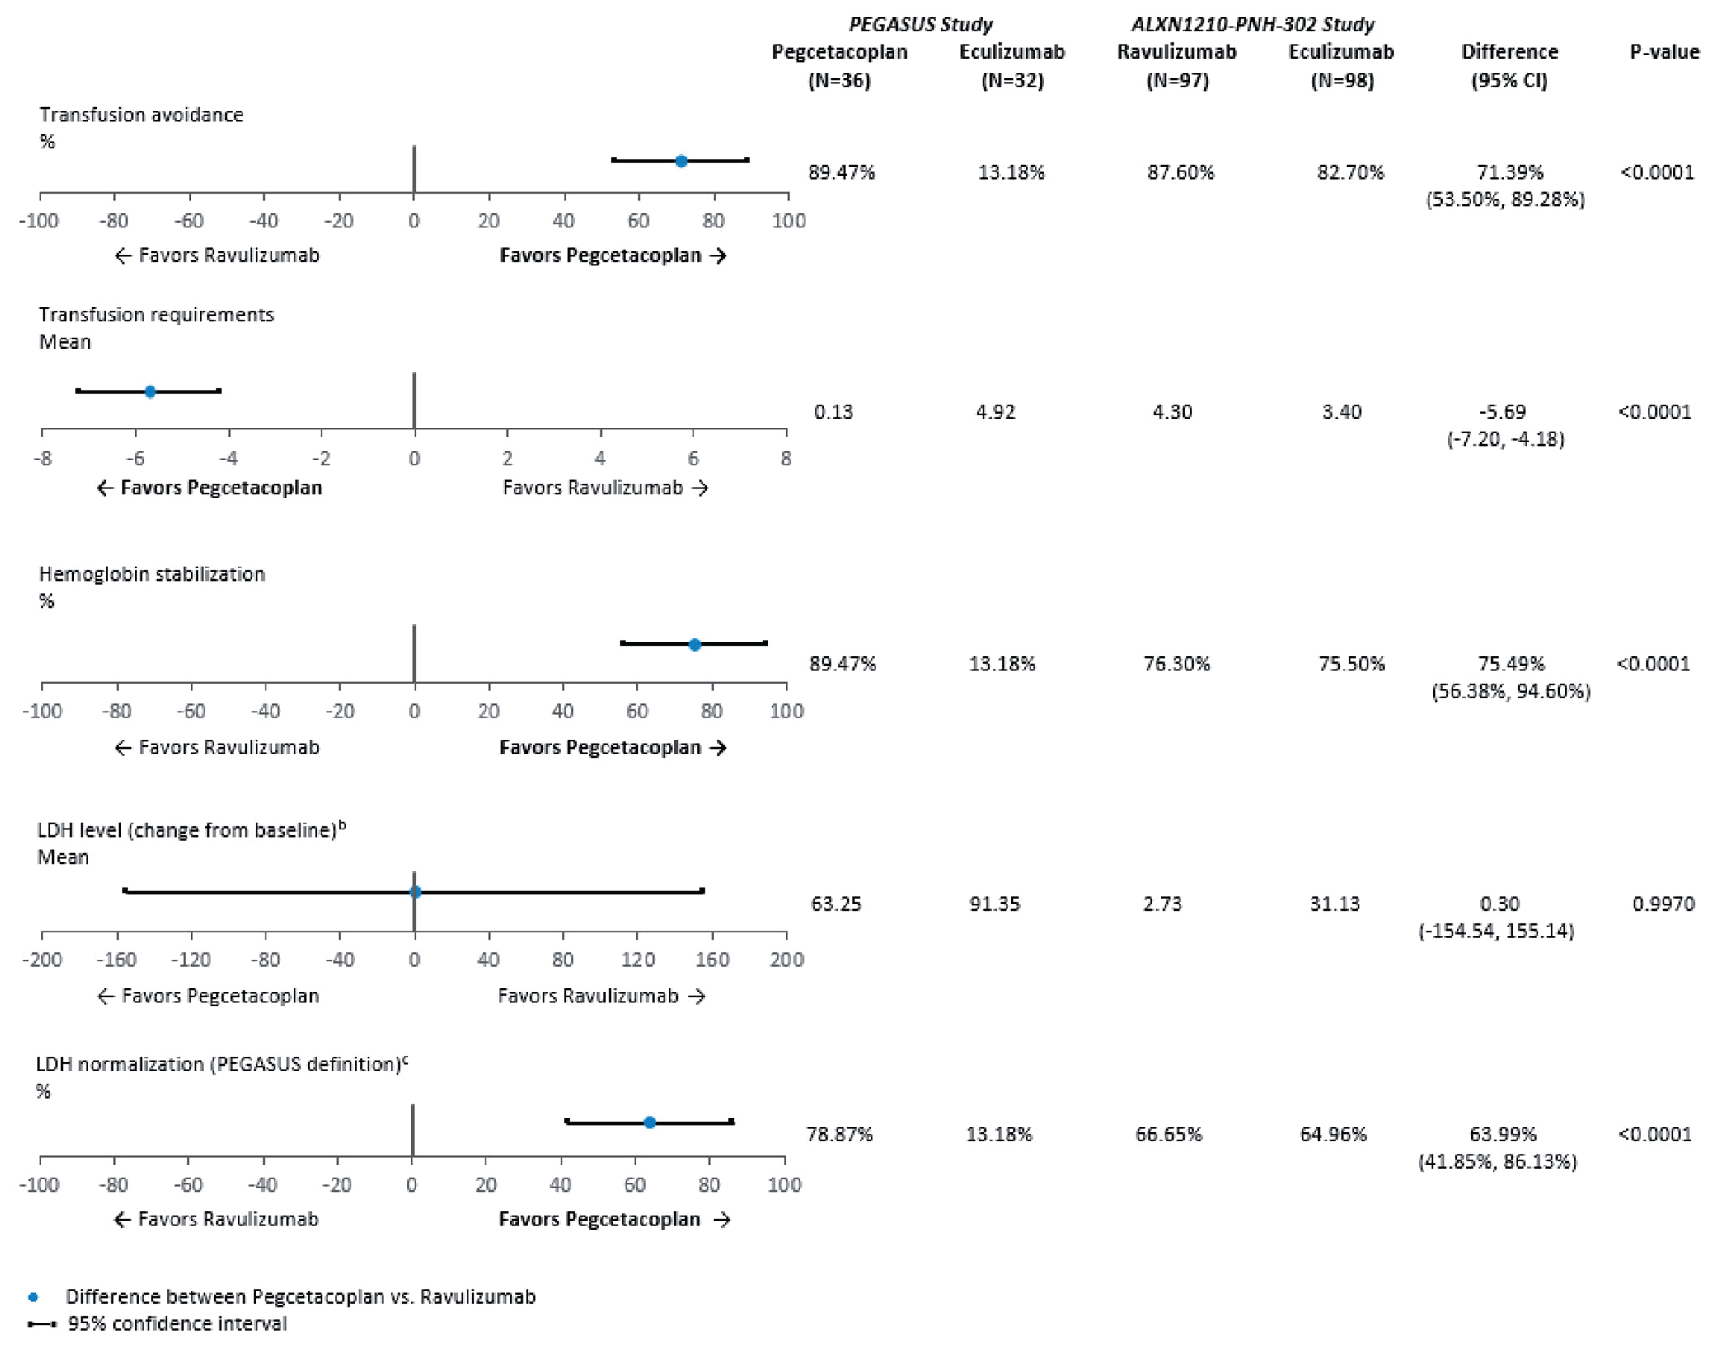 After matching and anchoring on eculizumab, the clinical and hematological outcomes favoured patients treated with pegcetacoplan compared with ravulizumab, except there was no difference in LDH level change from baseline.